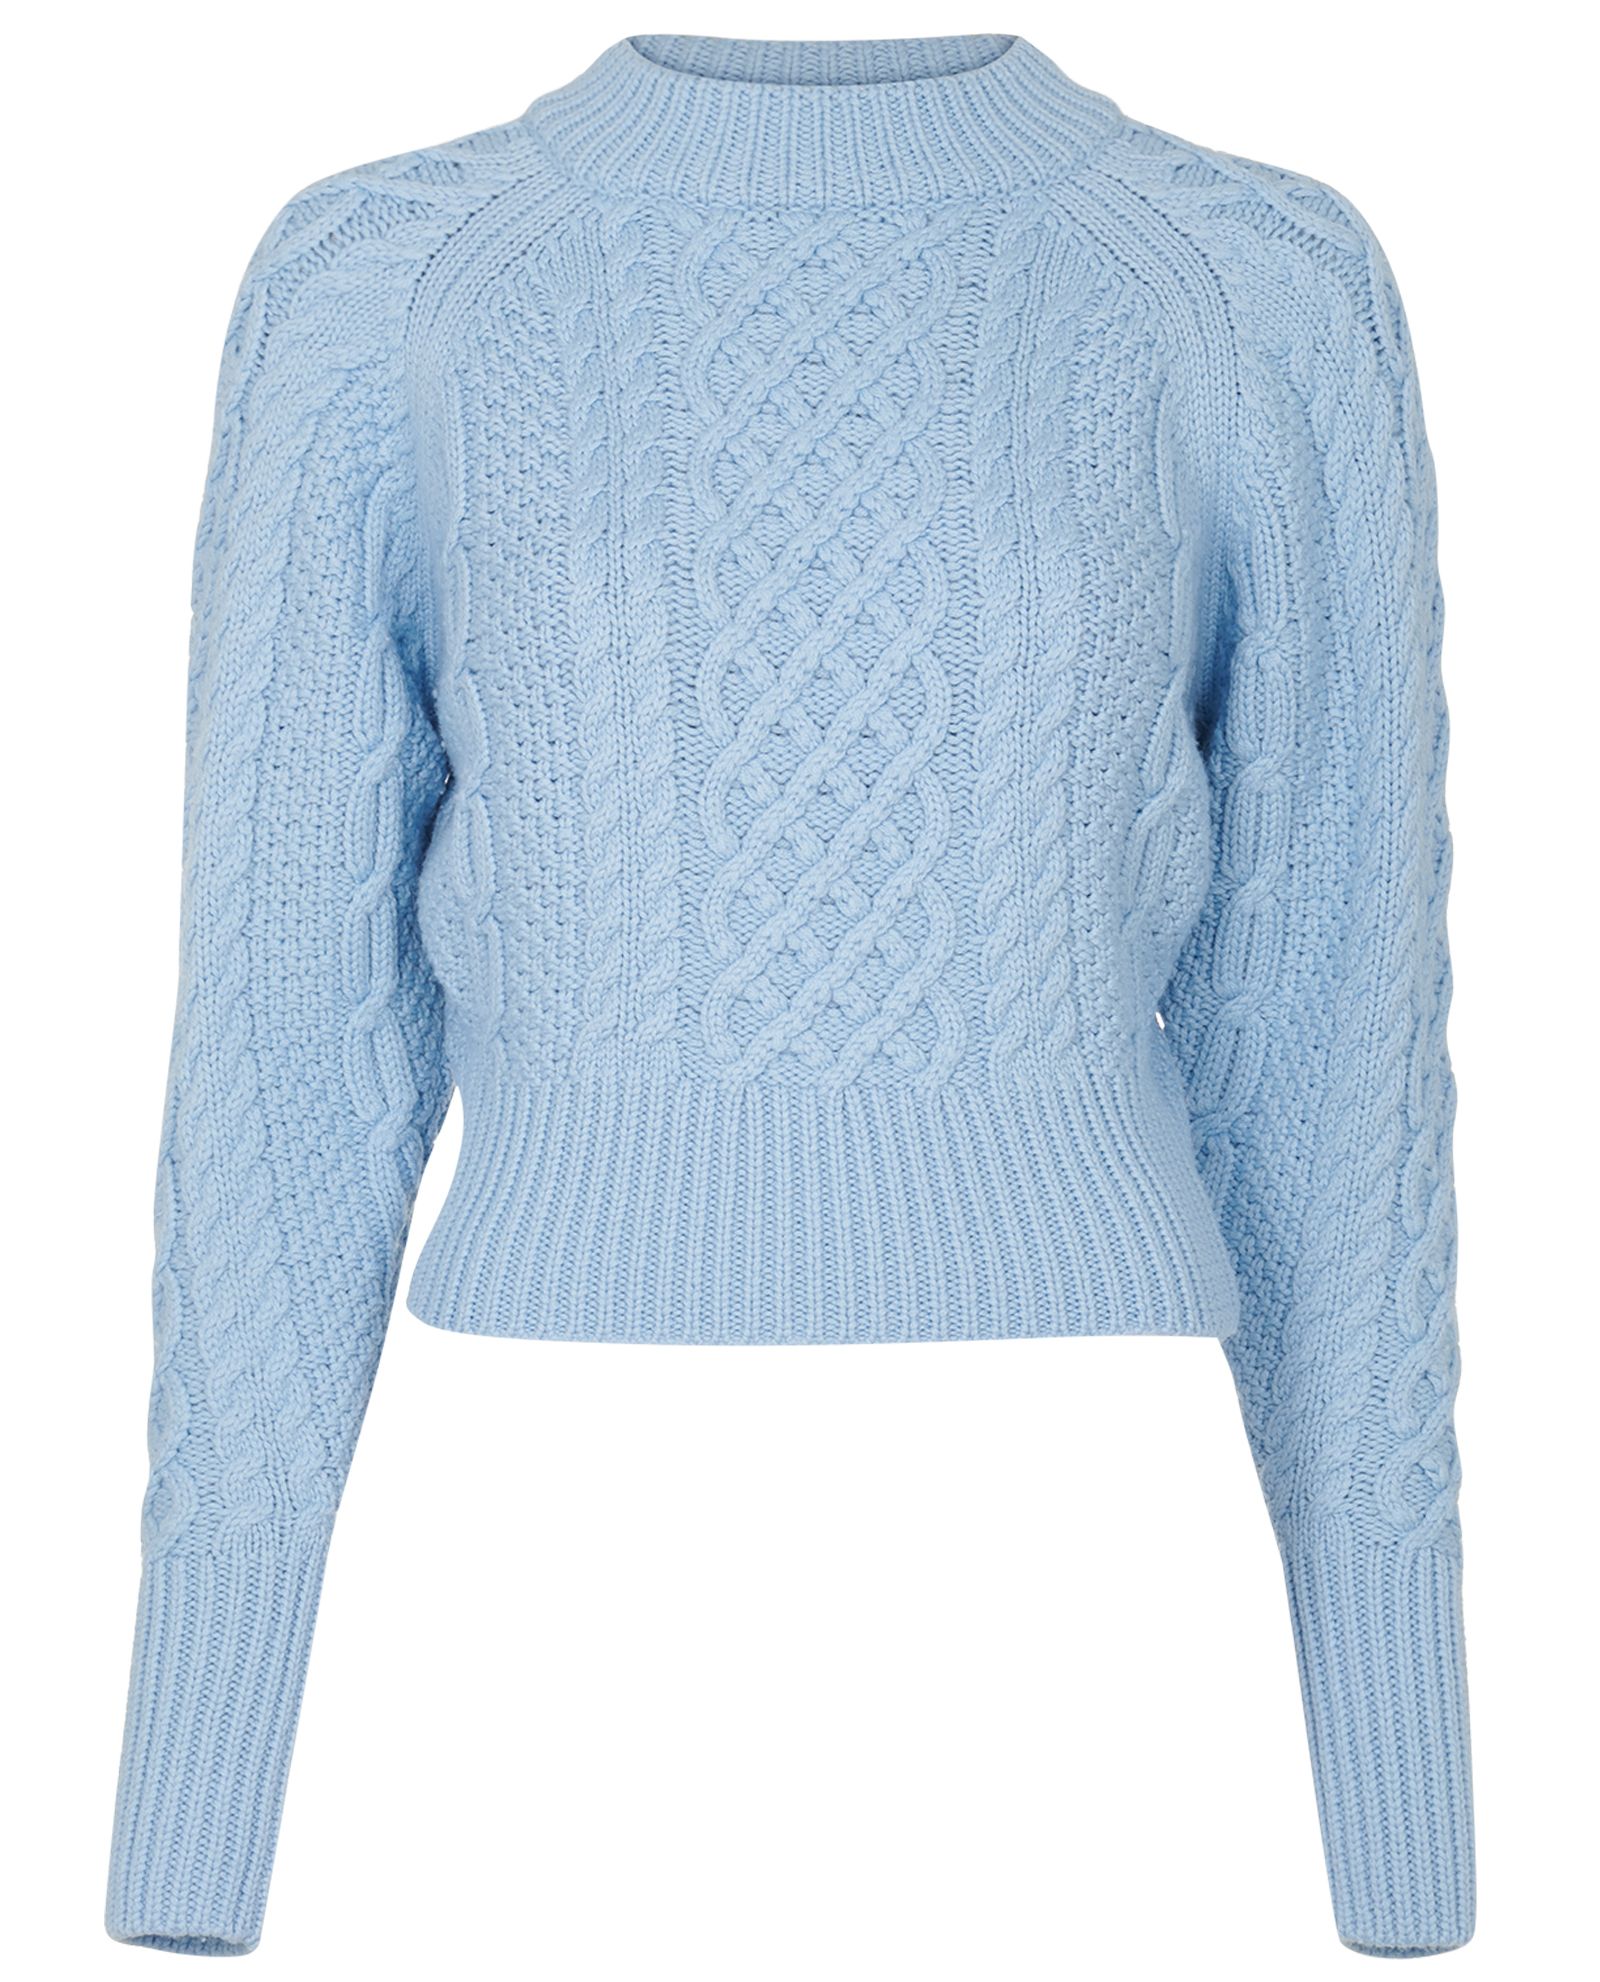 Emilia Wickstead Emory Chunky Cable Knit Sweater, Jumpers - Designer ...